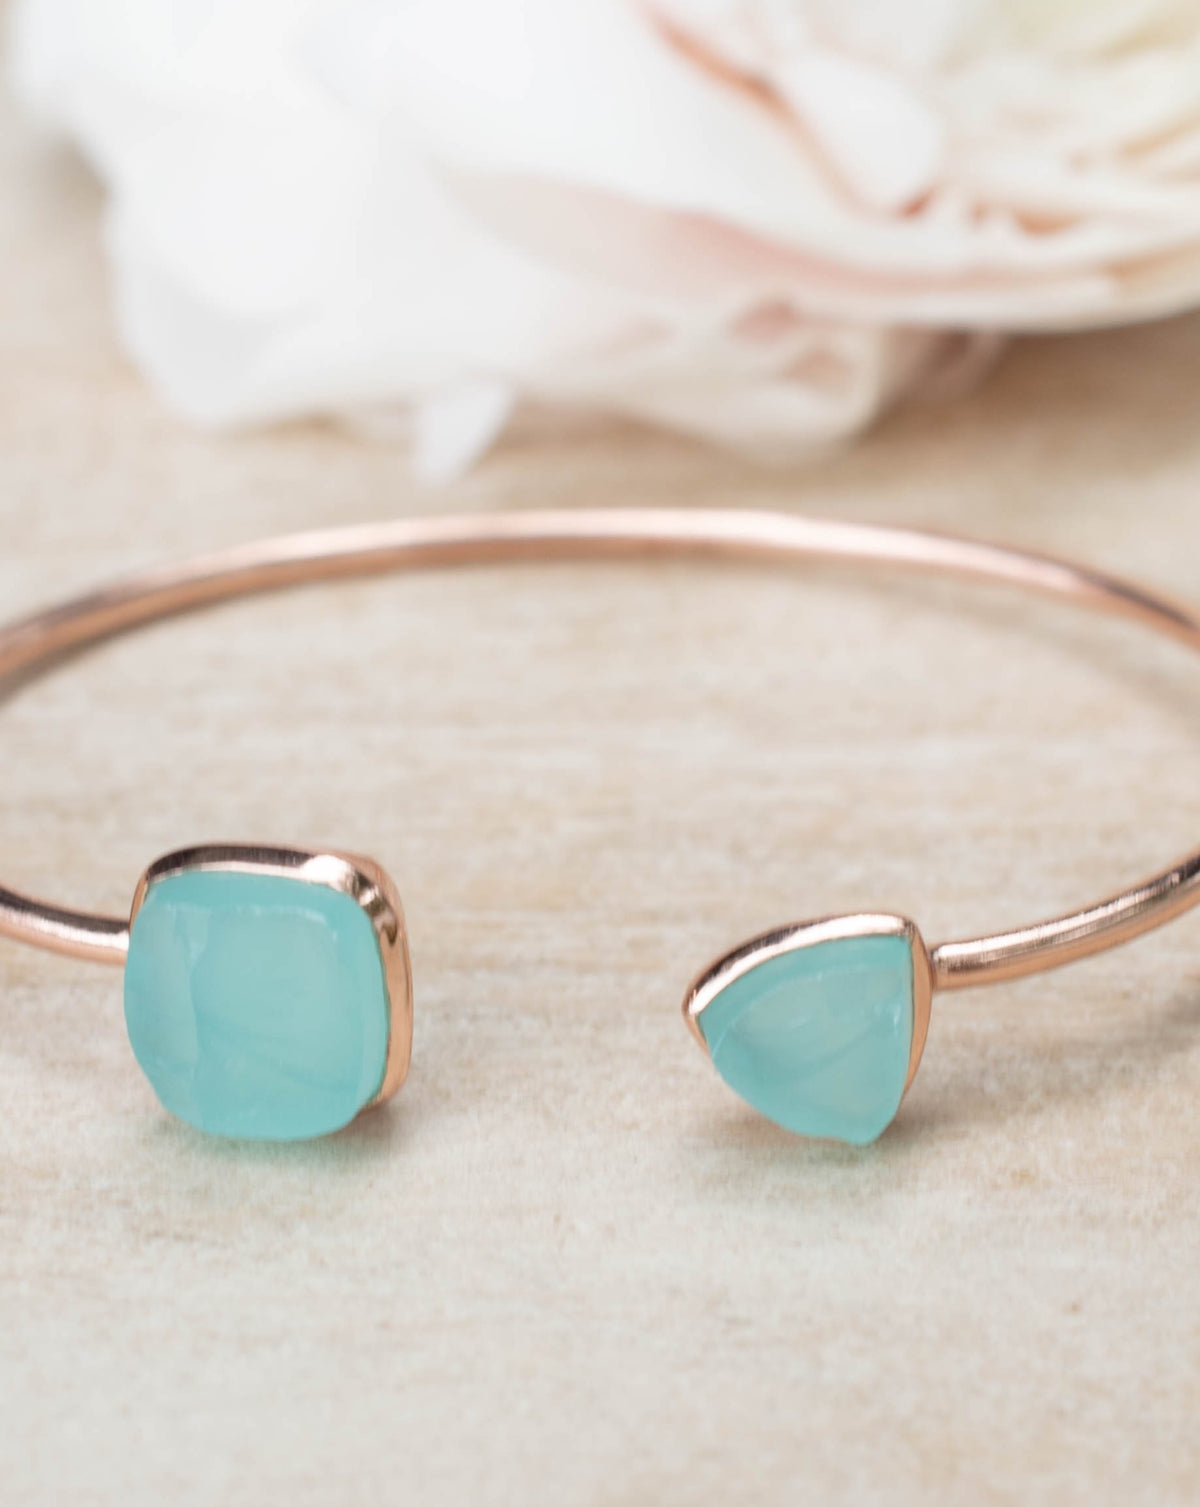 Rough Aqua Chalcedony Bangle Bracelet * Gold Plated 18k or Silver Plated Rose Gold Plated* Gemstone * Adjustable * Statement * BJB008C